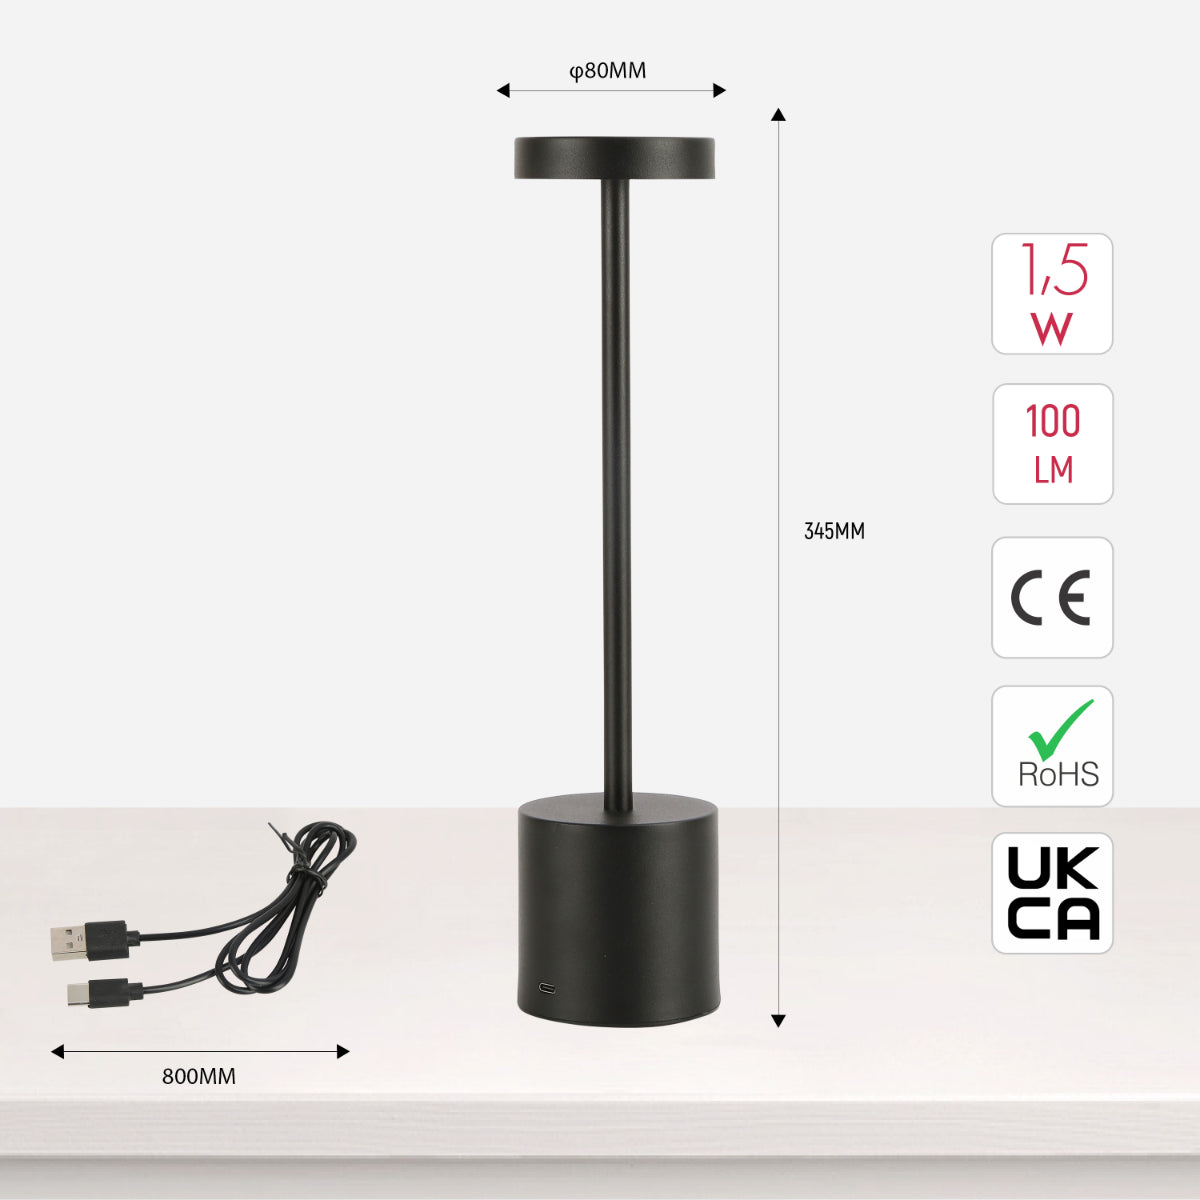 Size and certifications of Sleek Portable LED Column Lamp with CCT Control 130-03740